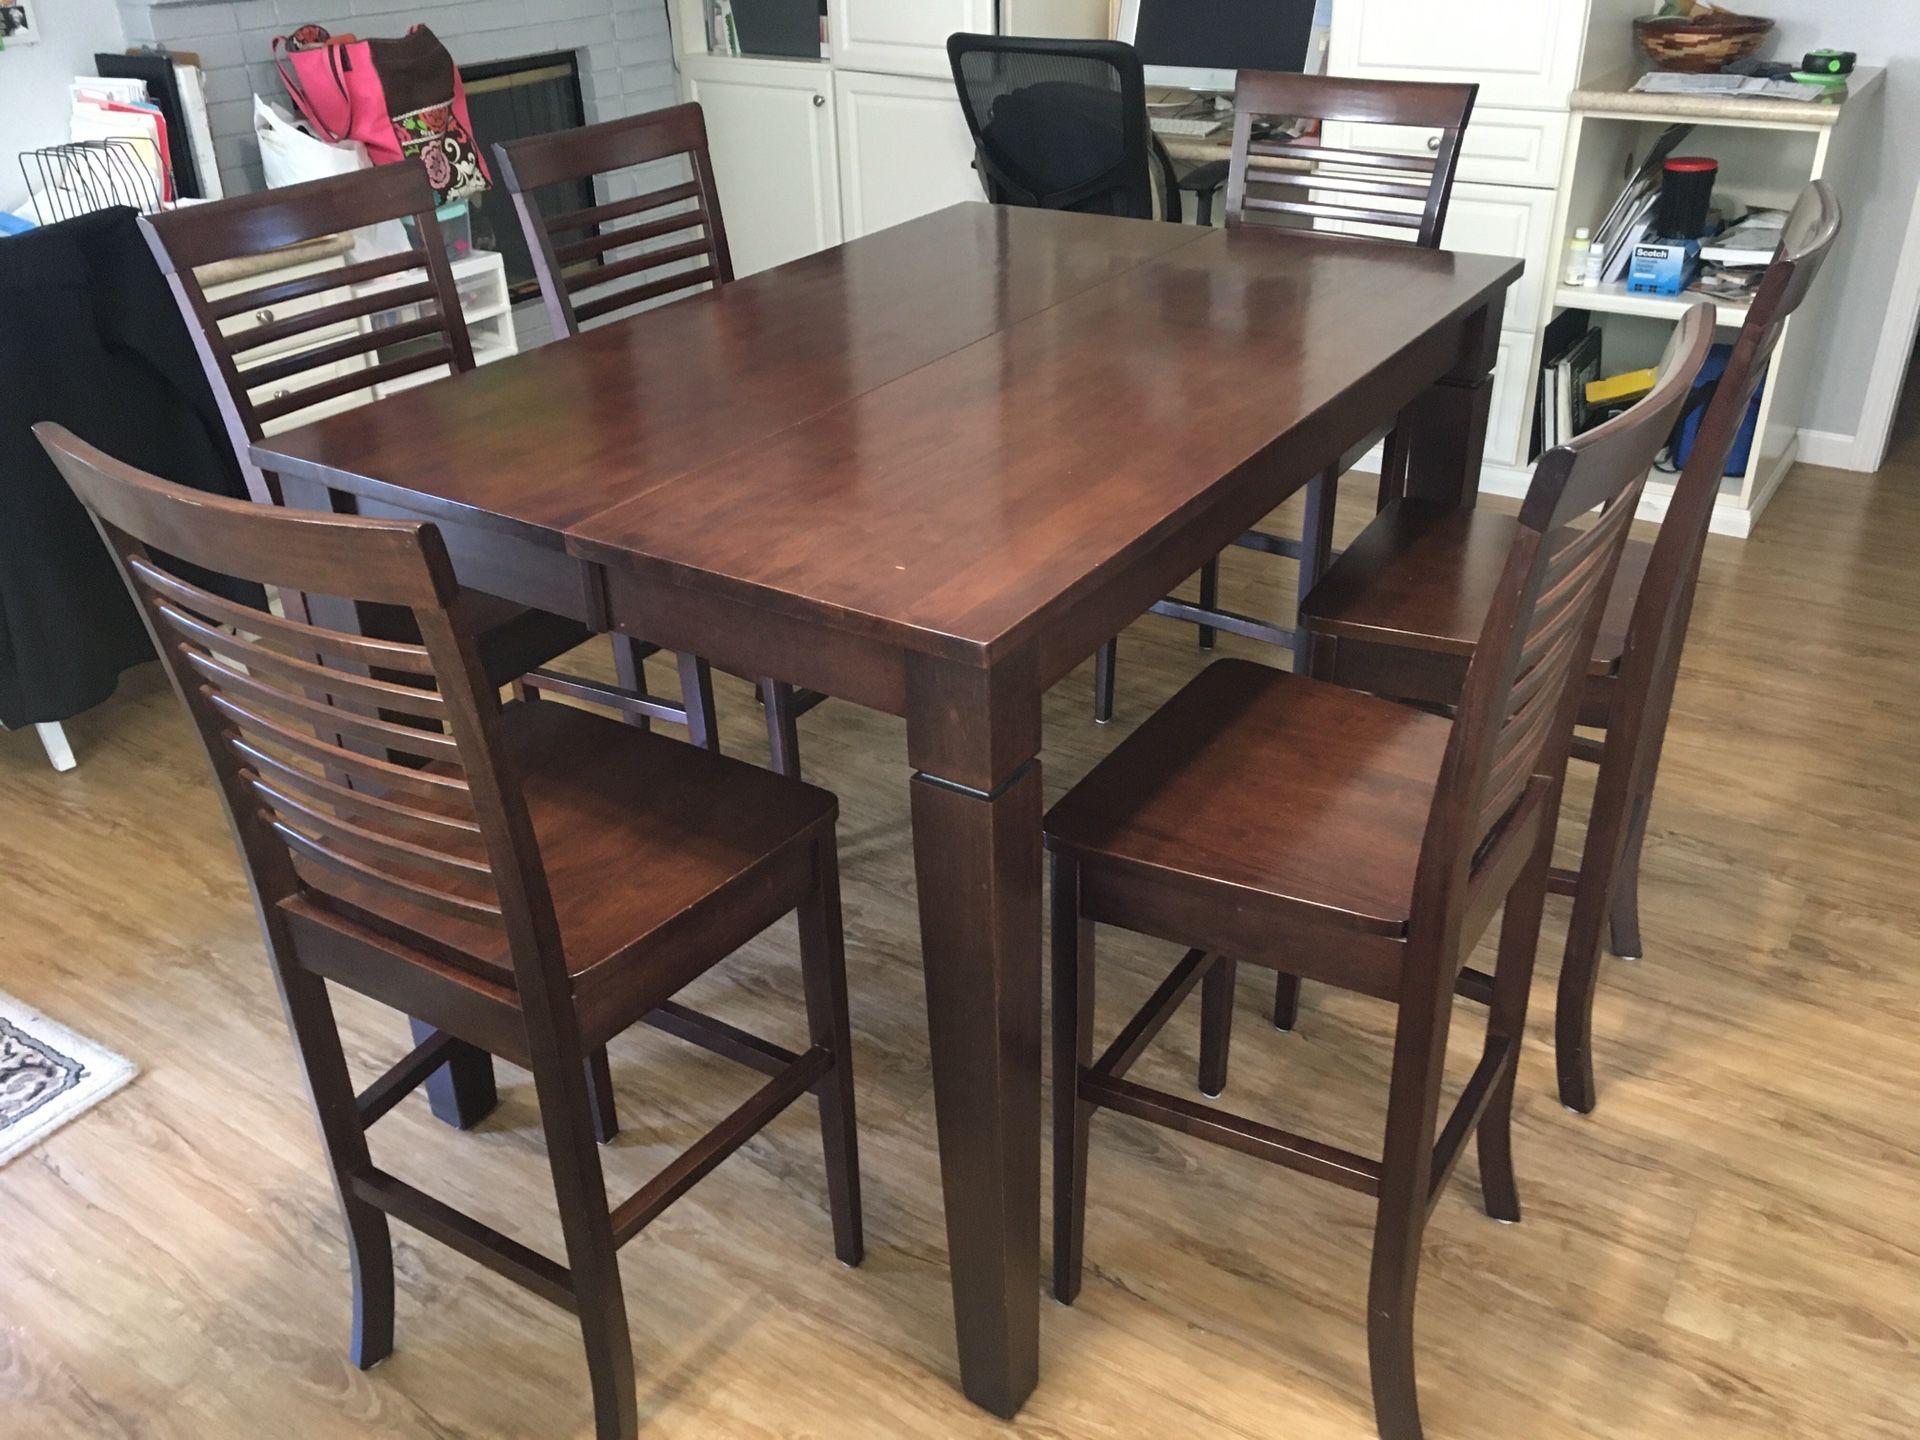 Counter height dining/kitchen table and chairs